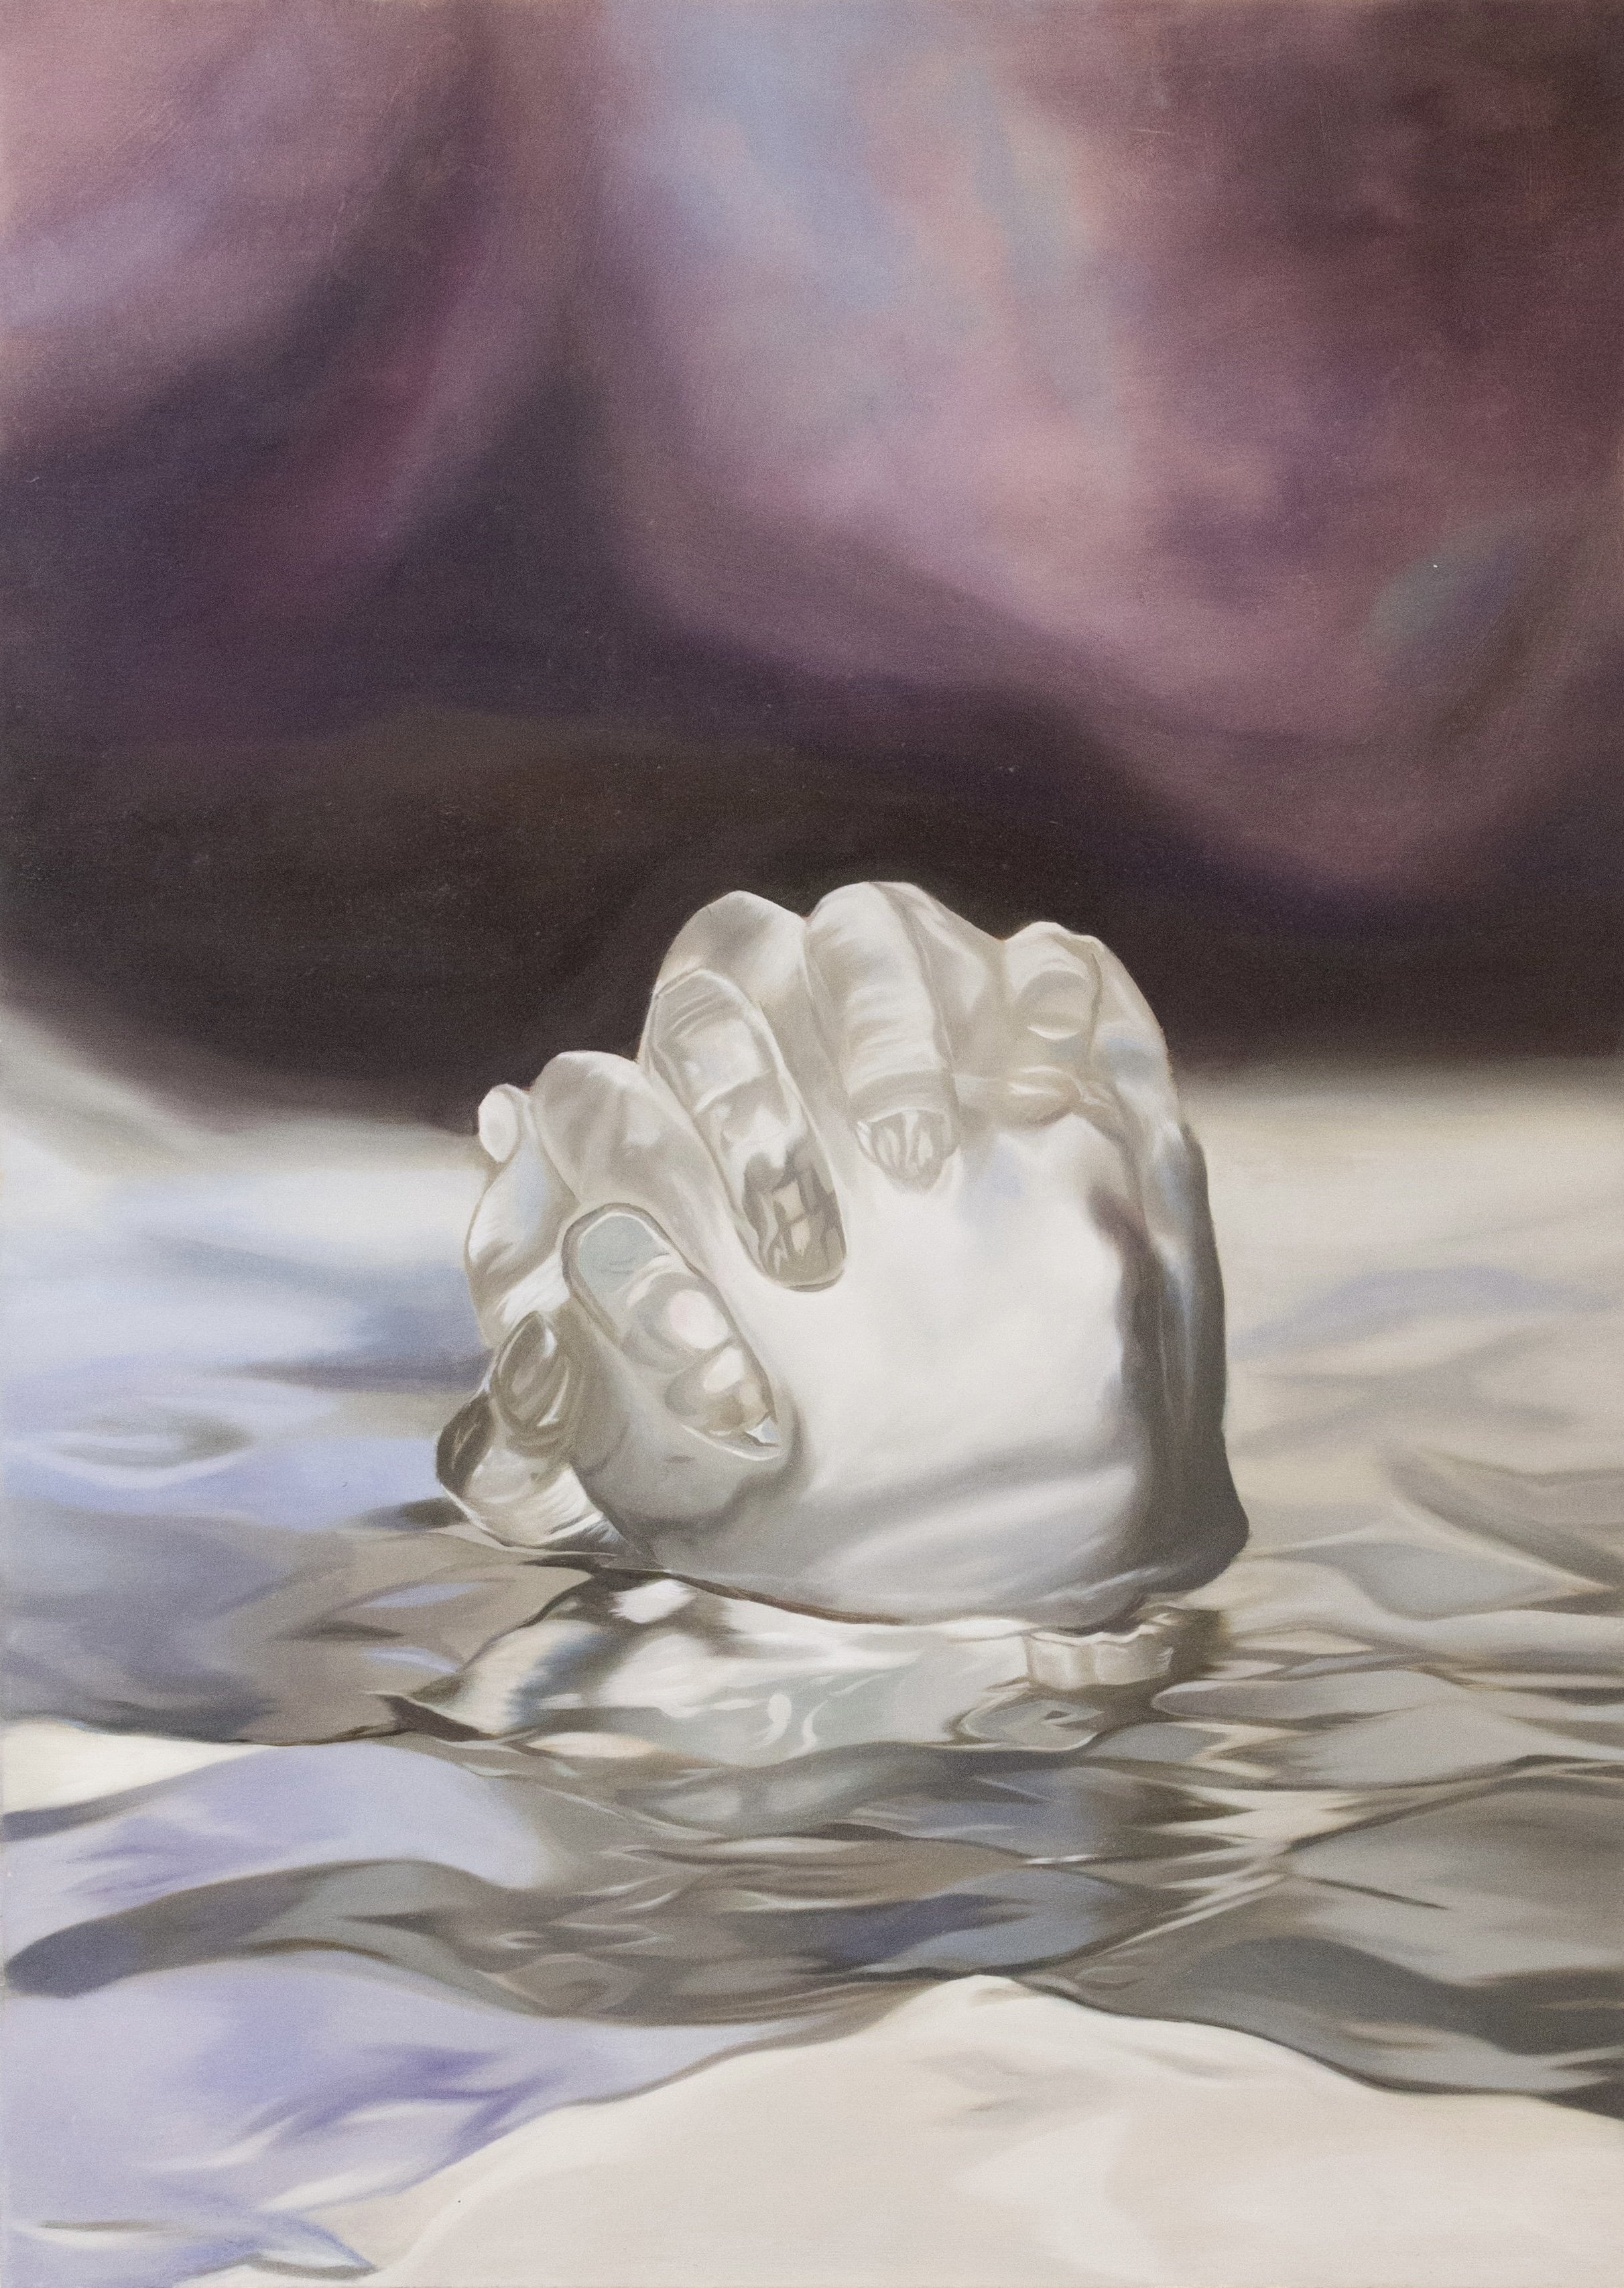  Suyi Xu,  All that is Solid Melts into Air , 2020. Oil on canvas, 28 x 22 inches ©Suyi Xu, Photograph by Xi Zhou, courtesy of Fou Gallery 